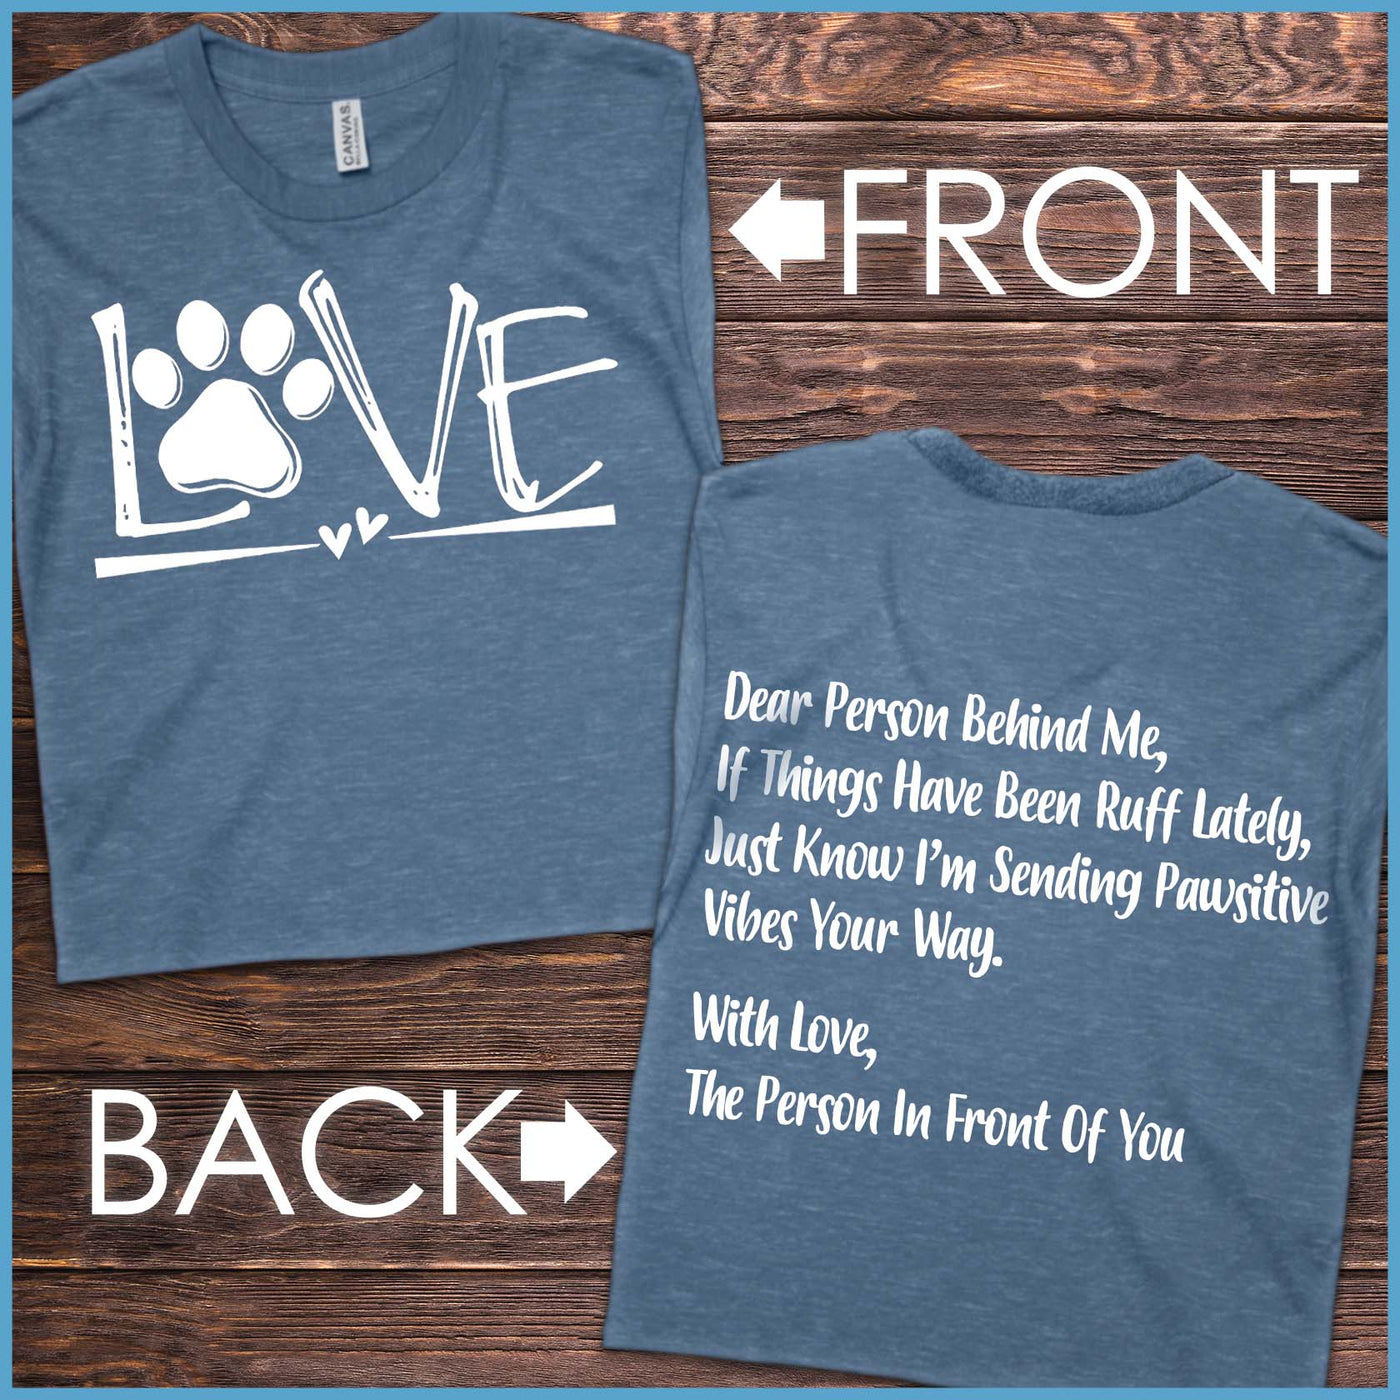 Dog Love, Dear Person Behind Me Long Sleeves - Project 2520 - Rocking The Dog Mom Life